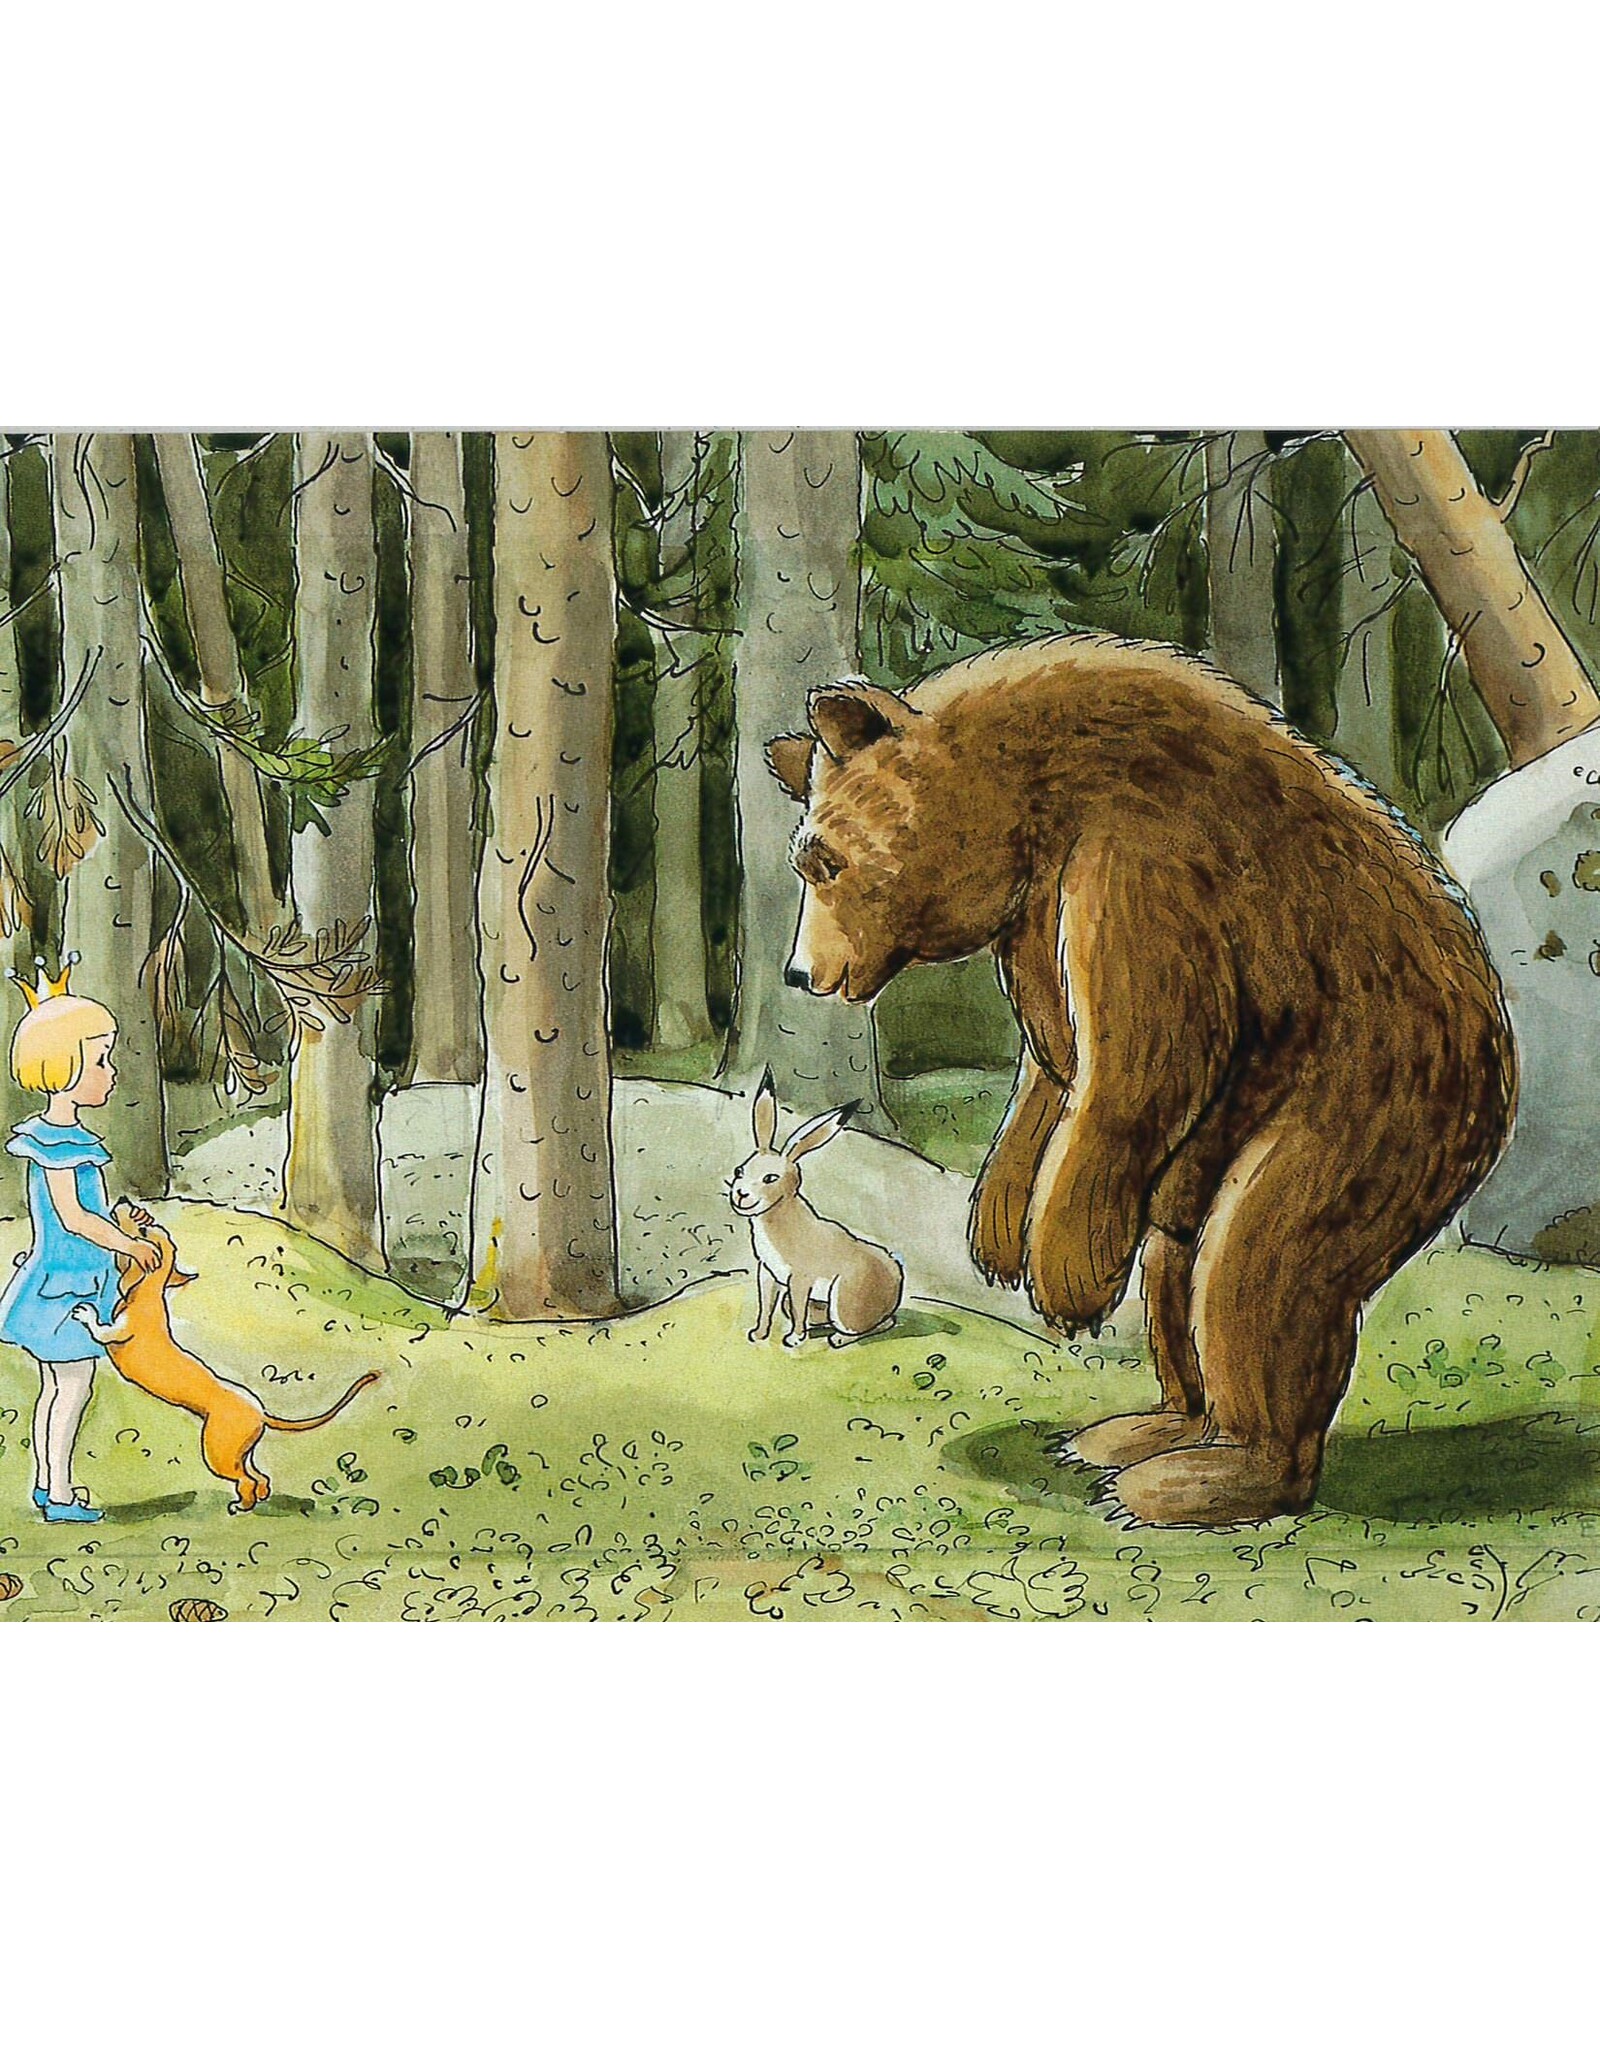 Bear and Rabbit in Forest Postcard